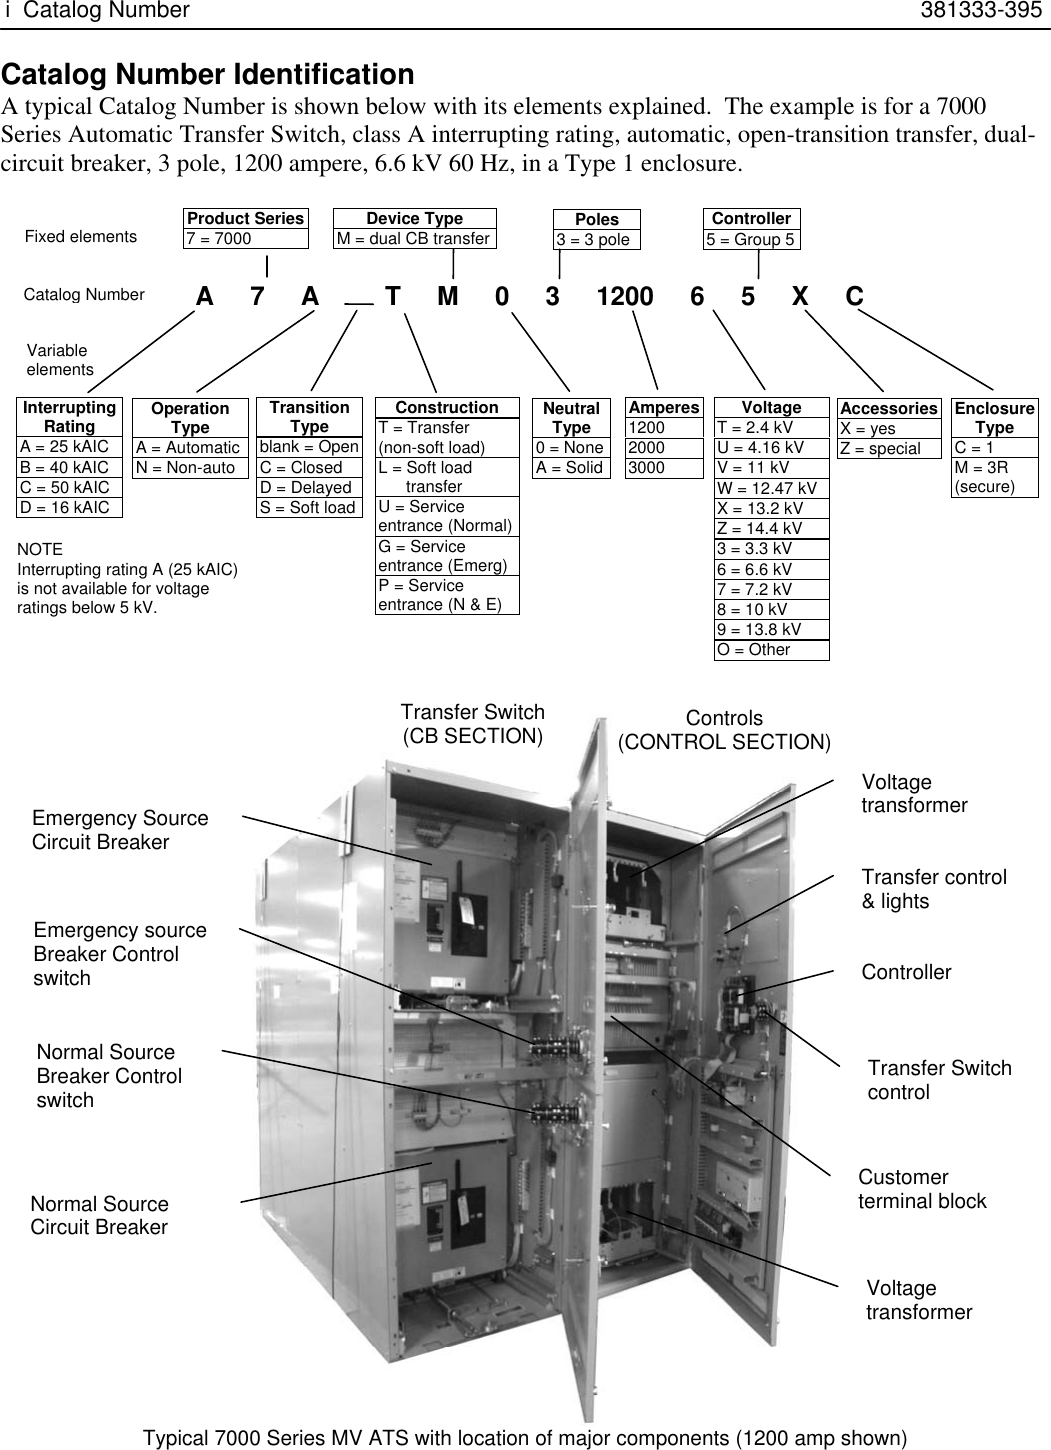 Asco 7000 Series Automatic Transfer Switch Wiring Diagram